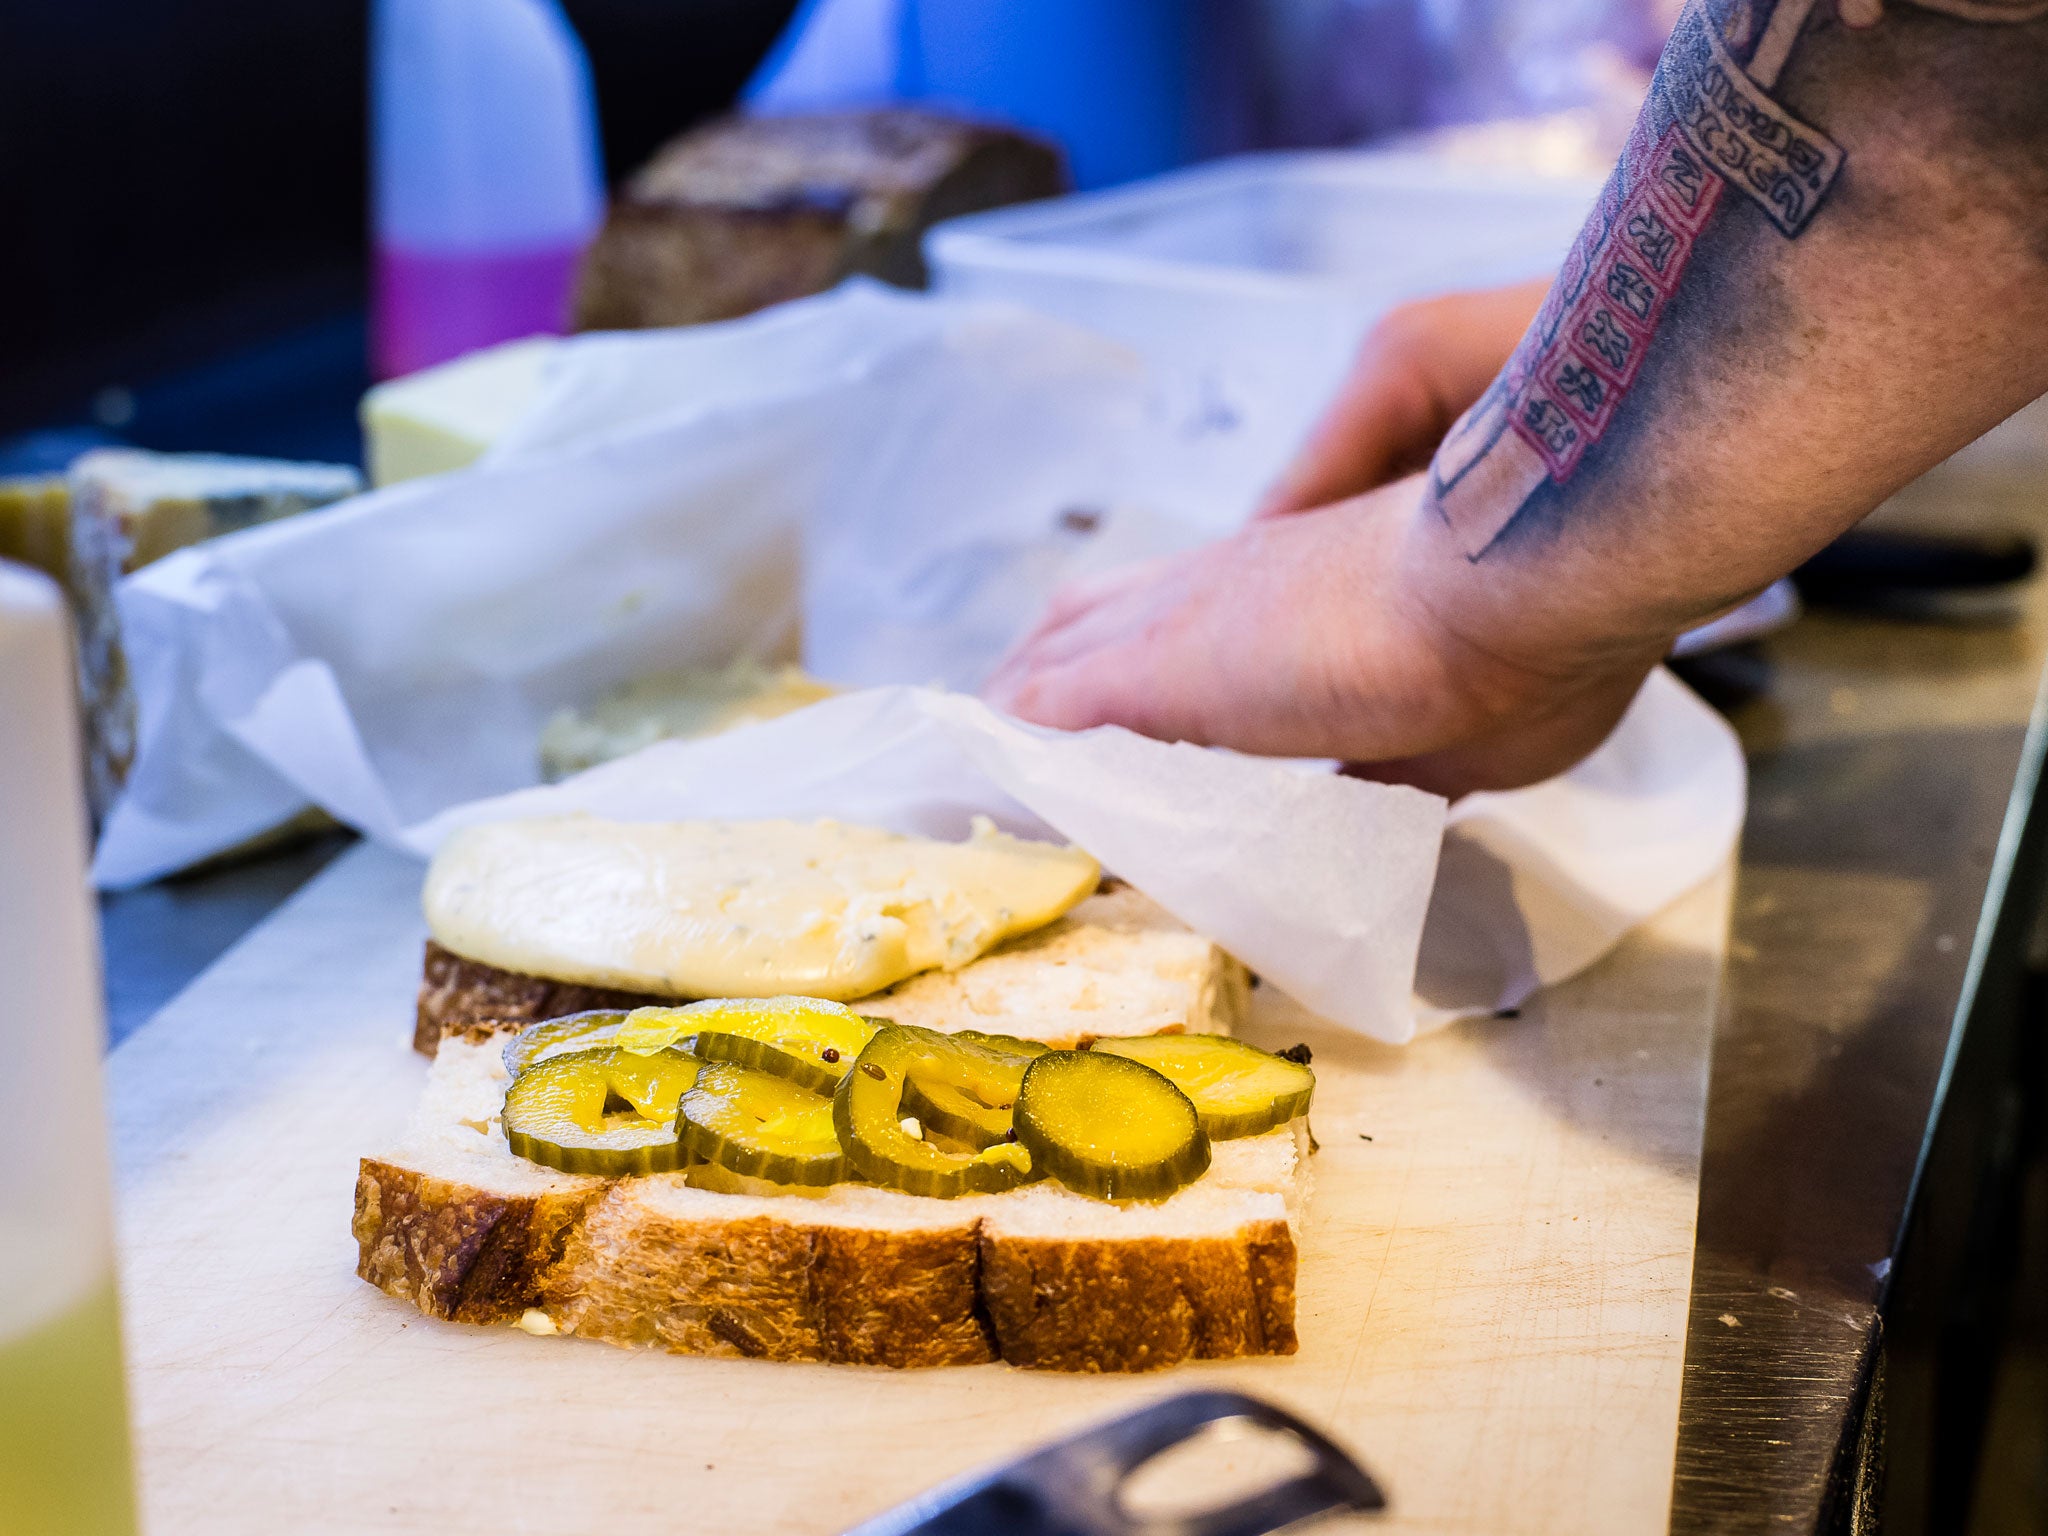 Adding pickles to the grilled beer cheese sandwich